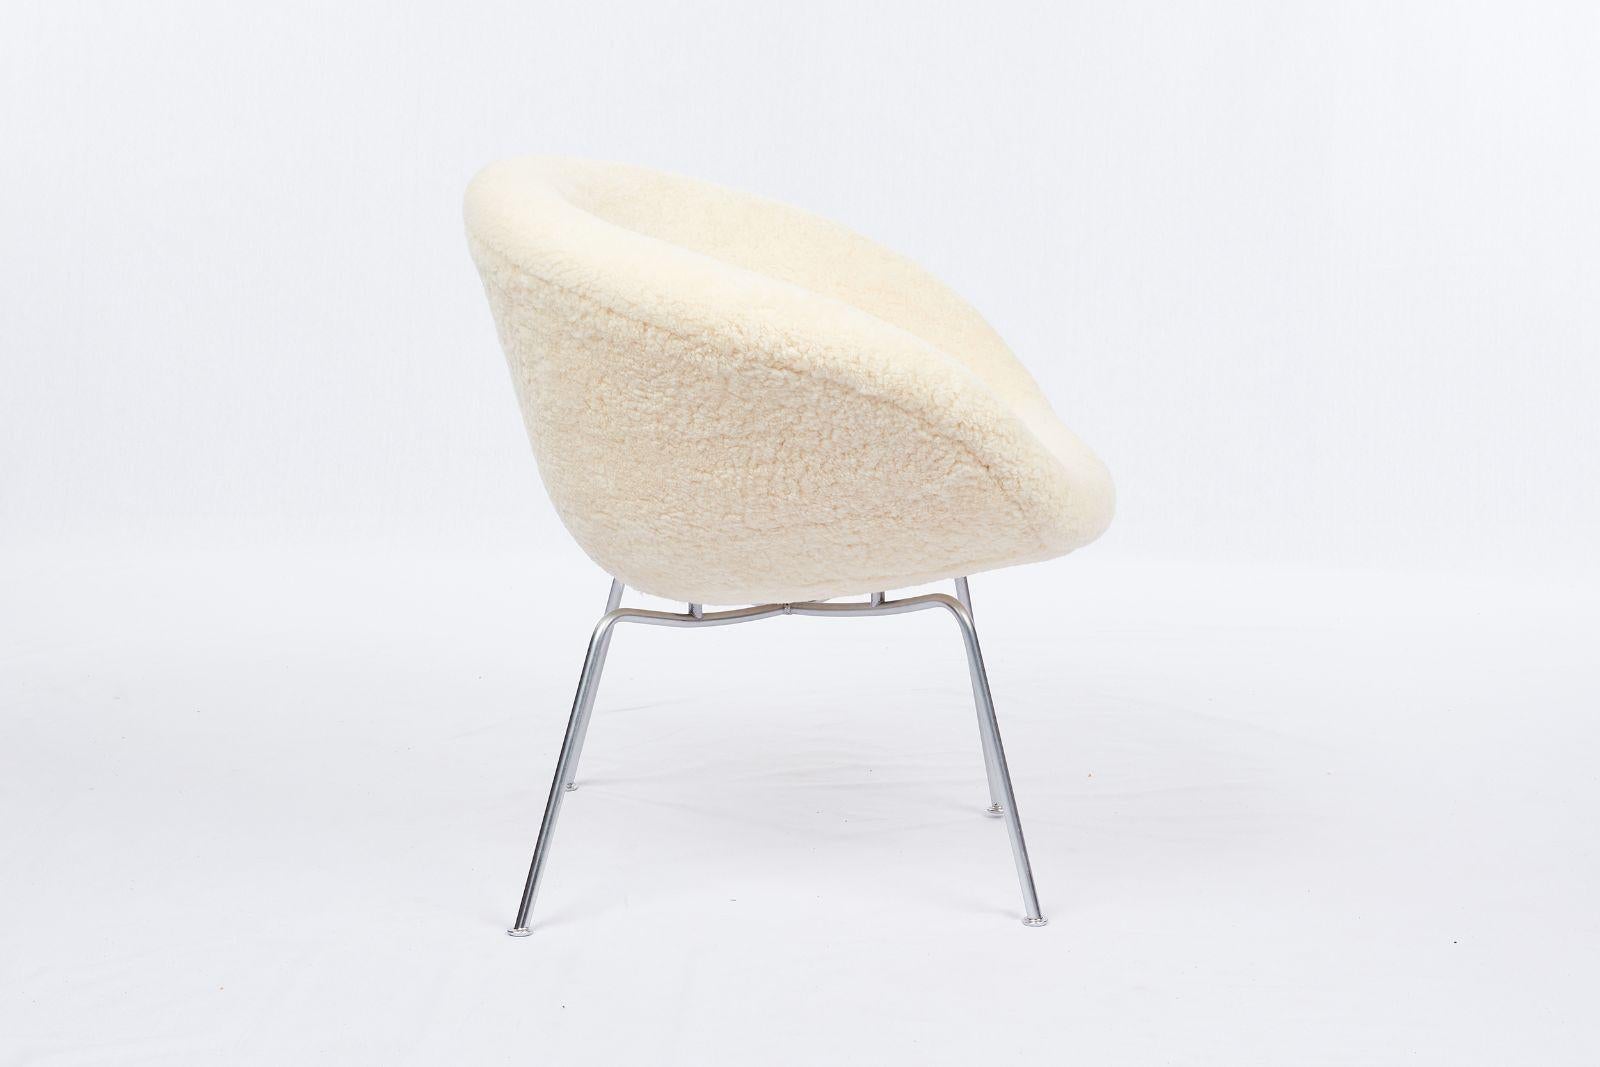 Arne Jacobsen Pot Chair Upholstered in Sheepskin In Excellent Condition For Sale In Los Angeles, CA